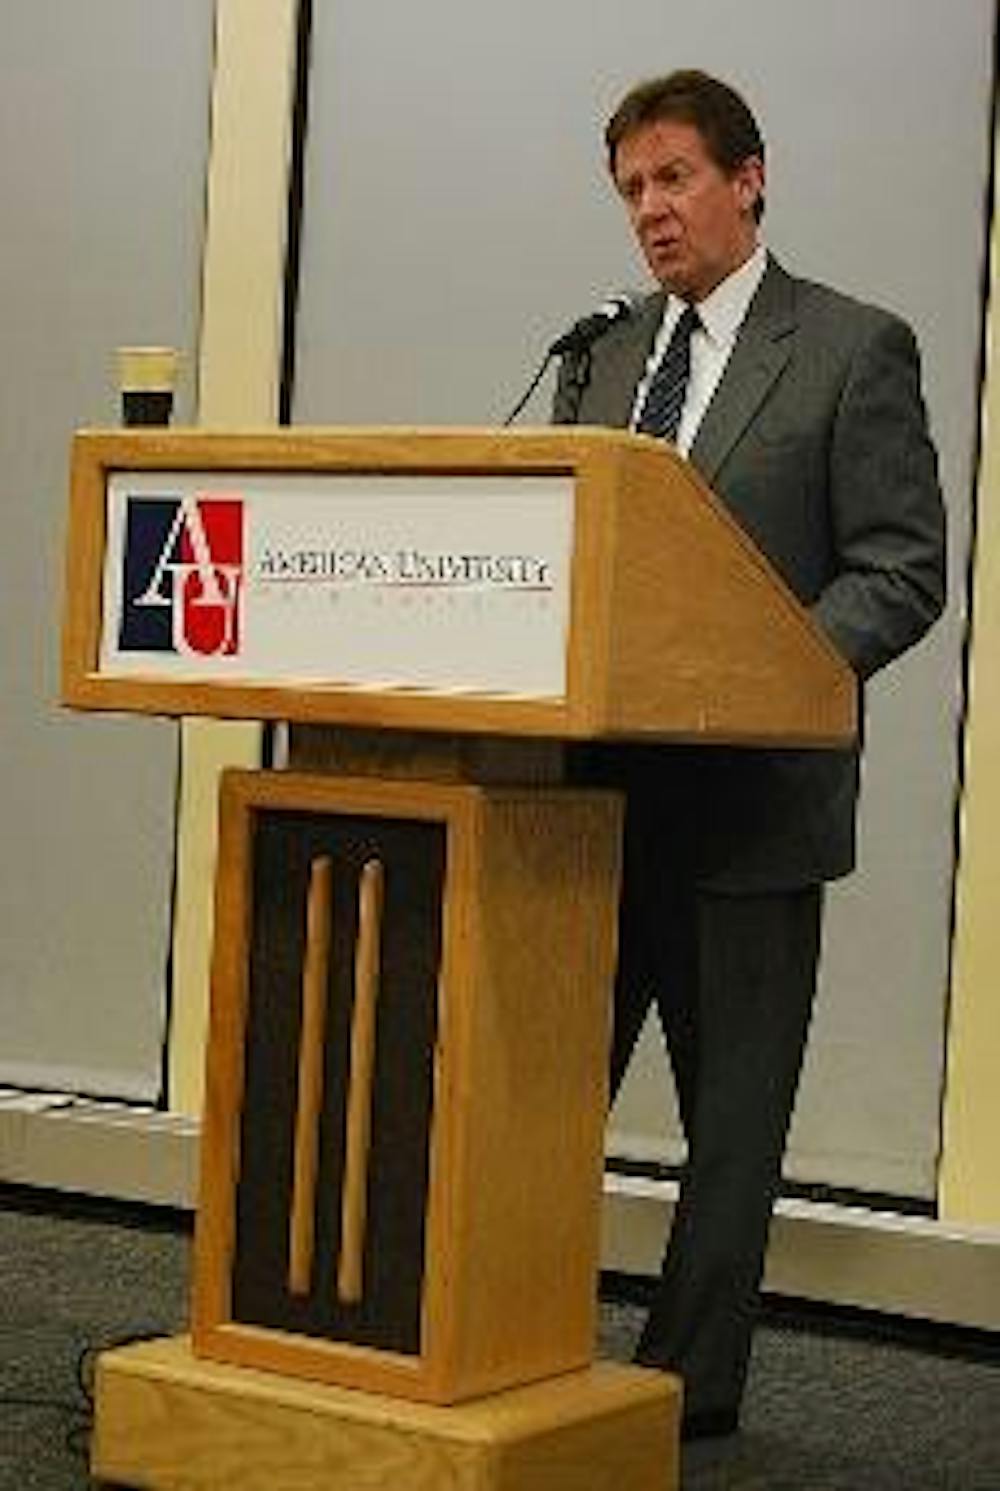 FROM THE PODIUM - In his second public speech in two days, AU President Neil Kerwin discussed improving alumni relations in the current economy Monday in the Mary Graydon Center.